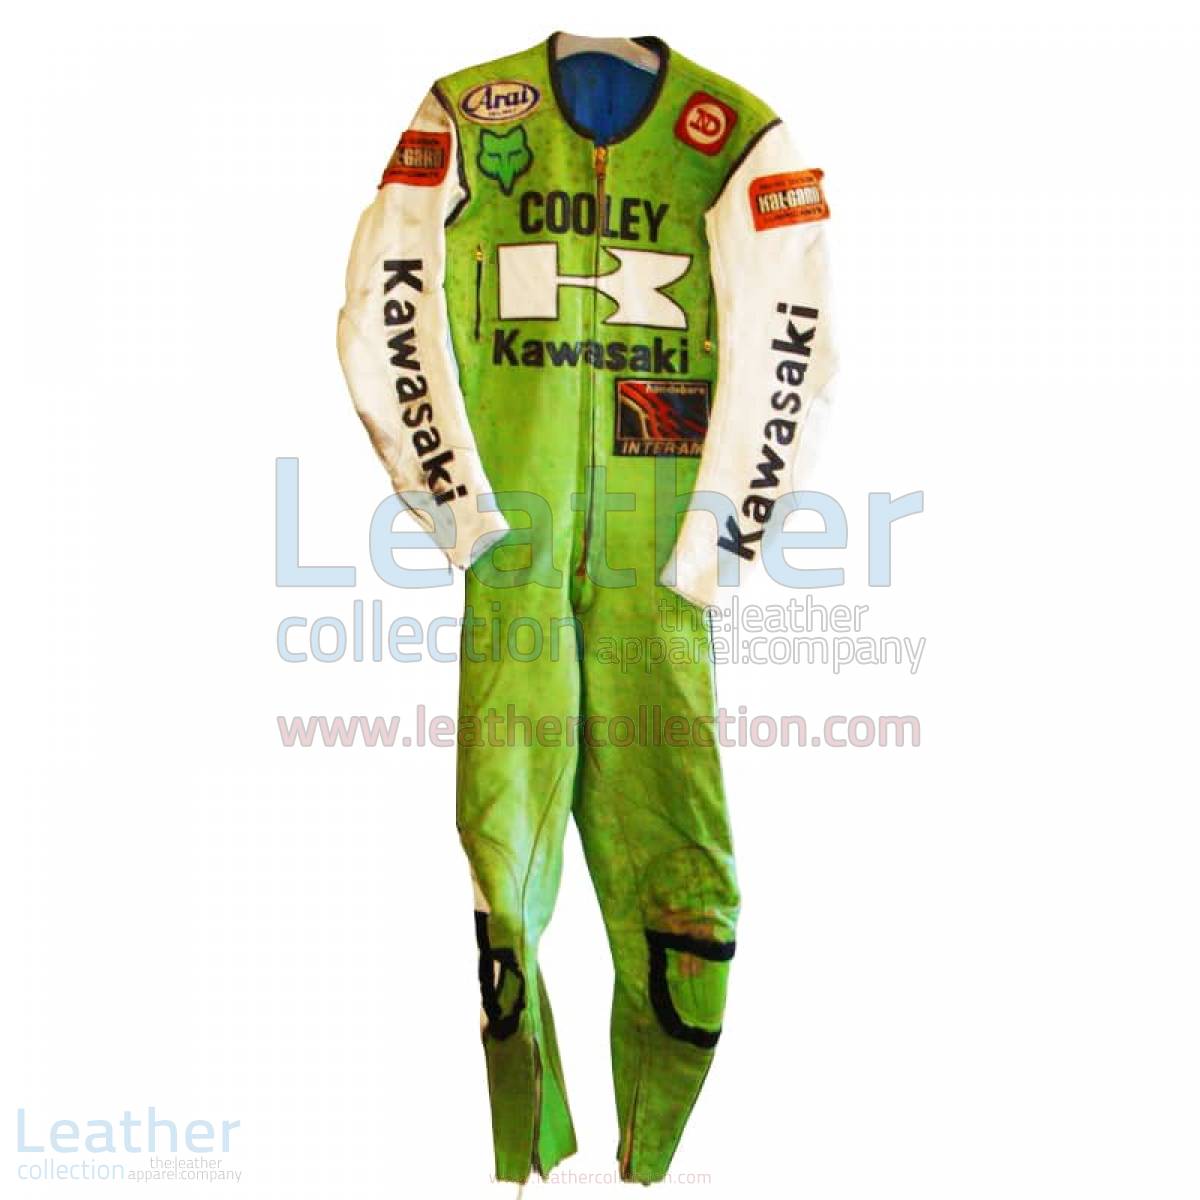 Wes Cooley Kawasaki AMA 1983 Leather Suit